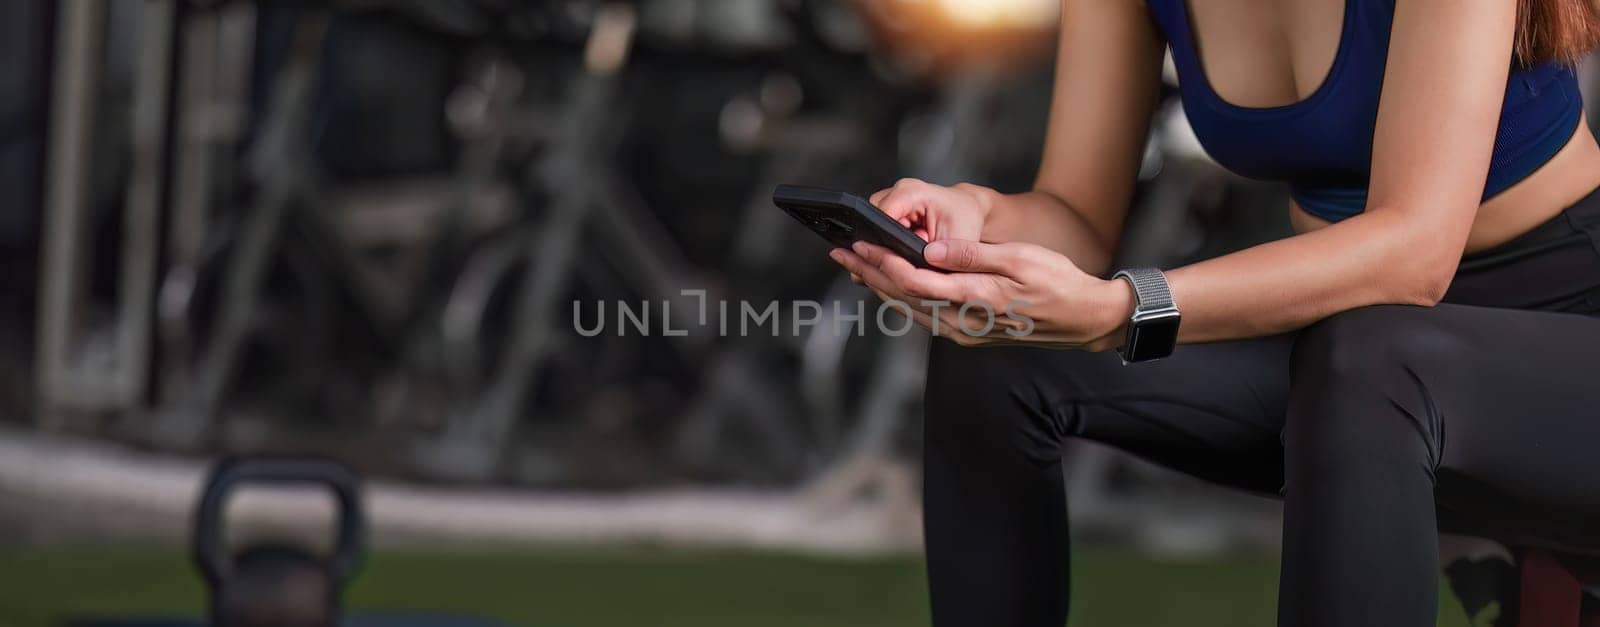 Young female athlete in sportswear sits at the gym using a cell phone while relaxing. by wichayada